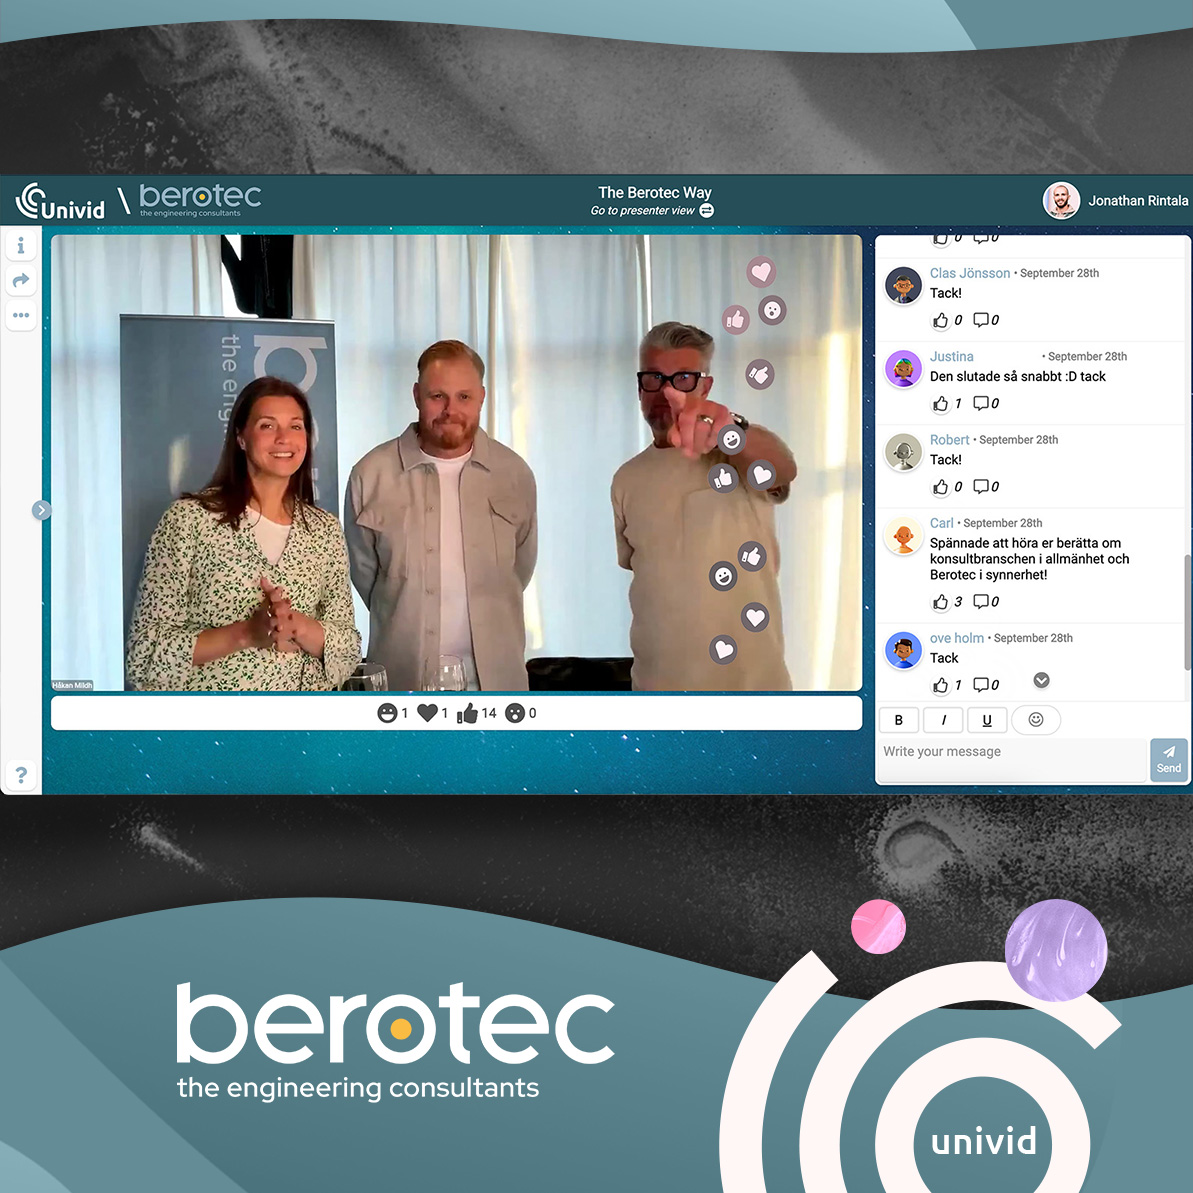 'The Berotec Way' was the topic on everyone's lips for Berotec's latest employer branding webinar on Univid. An hour-long evening event, with tons of curious questions being answered from the chat. How do you actually build a sustainable career as an engineer? 'We have used Univid for webinars about our unique way of building a sustainable career - together.' - Helena Torhage, VP of Marketing and Talent, Berotec.